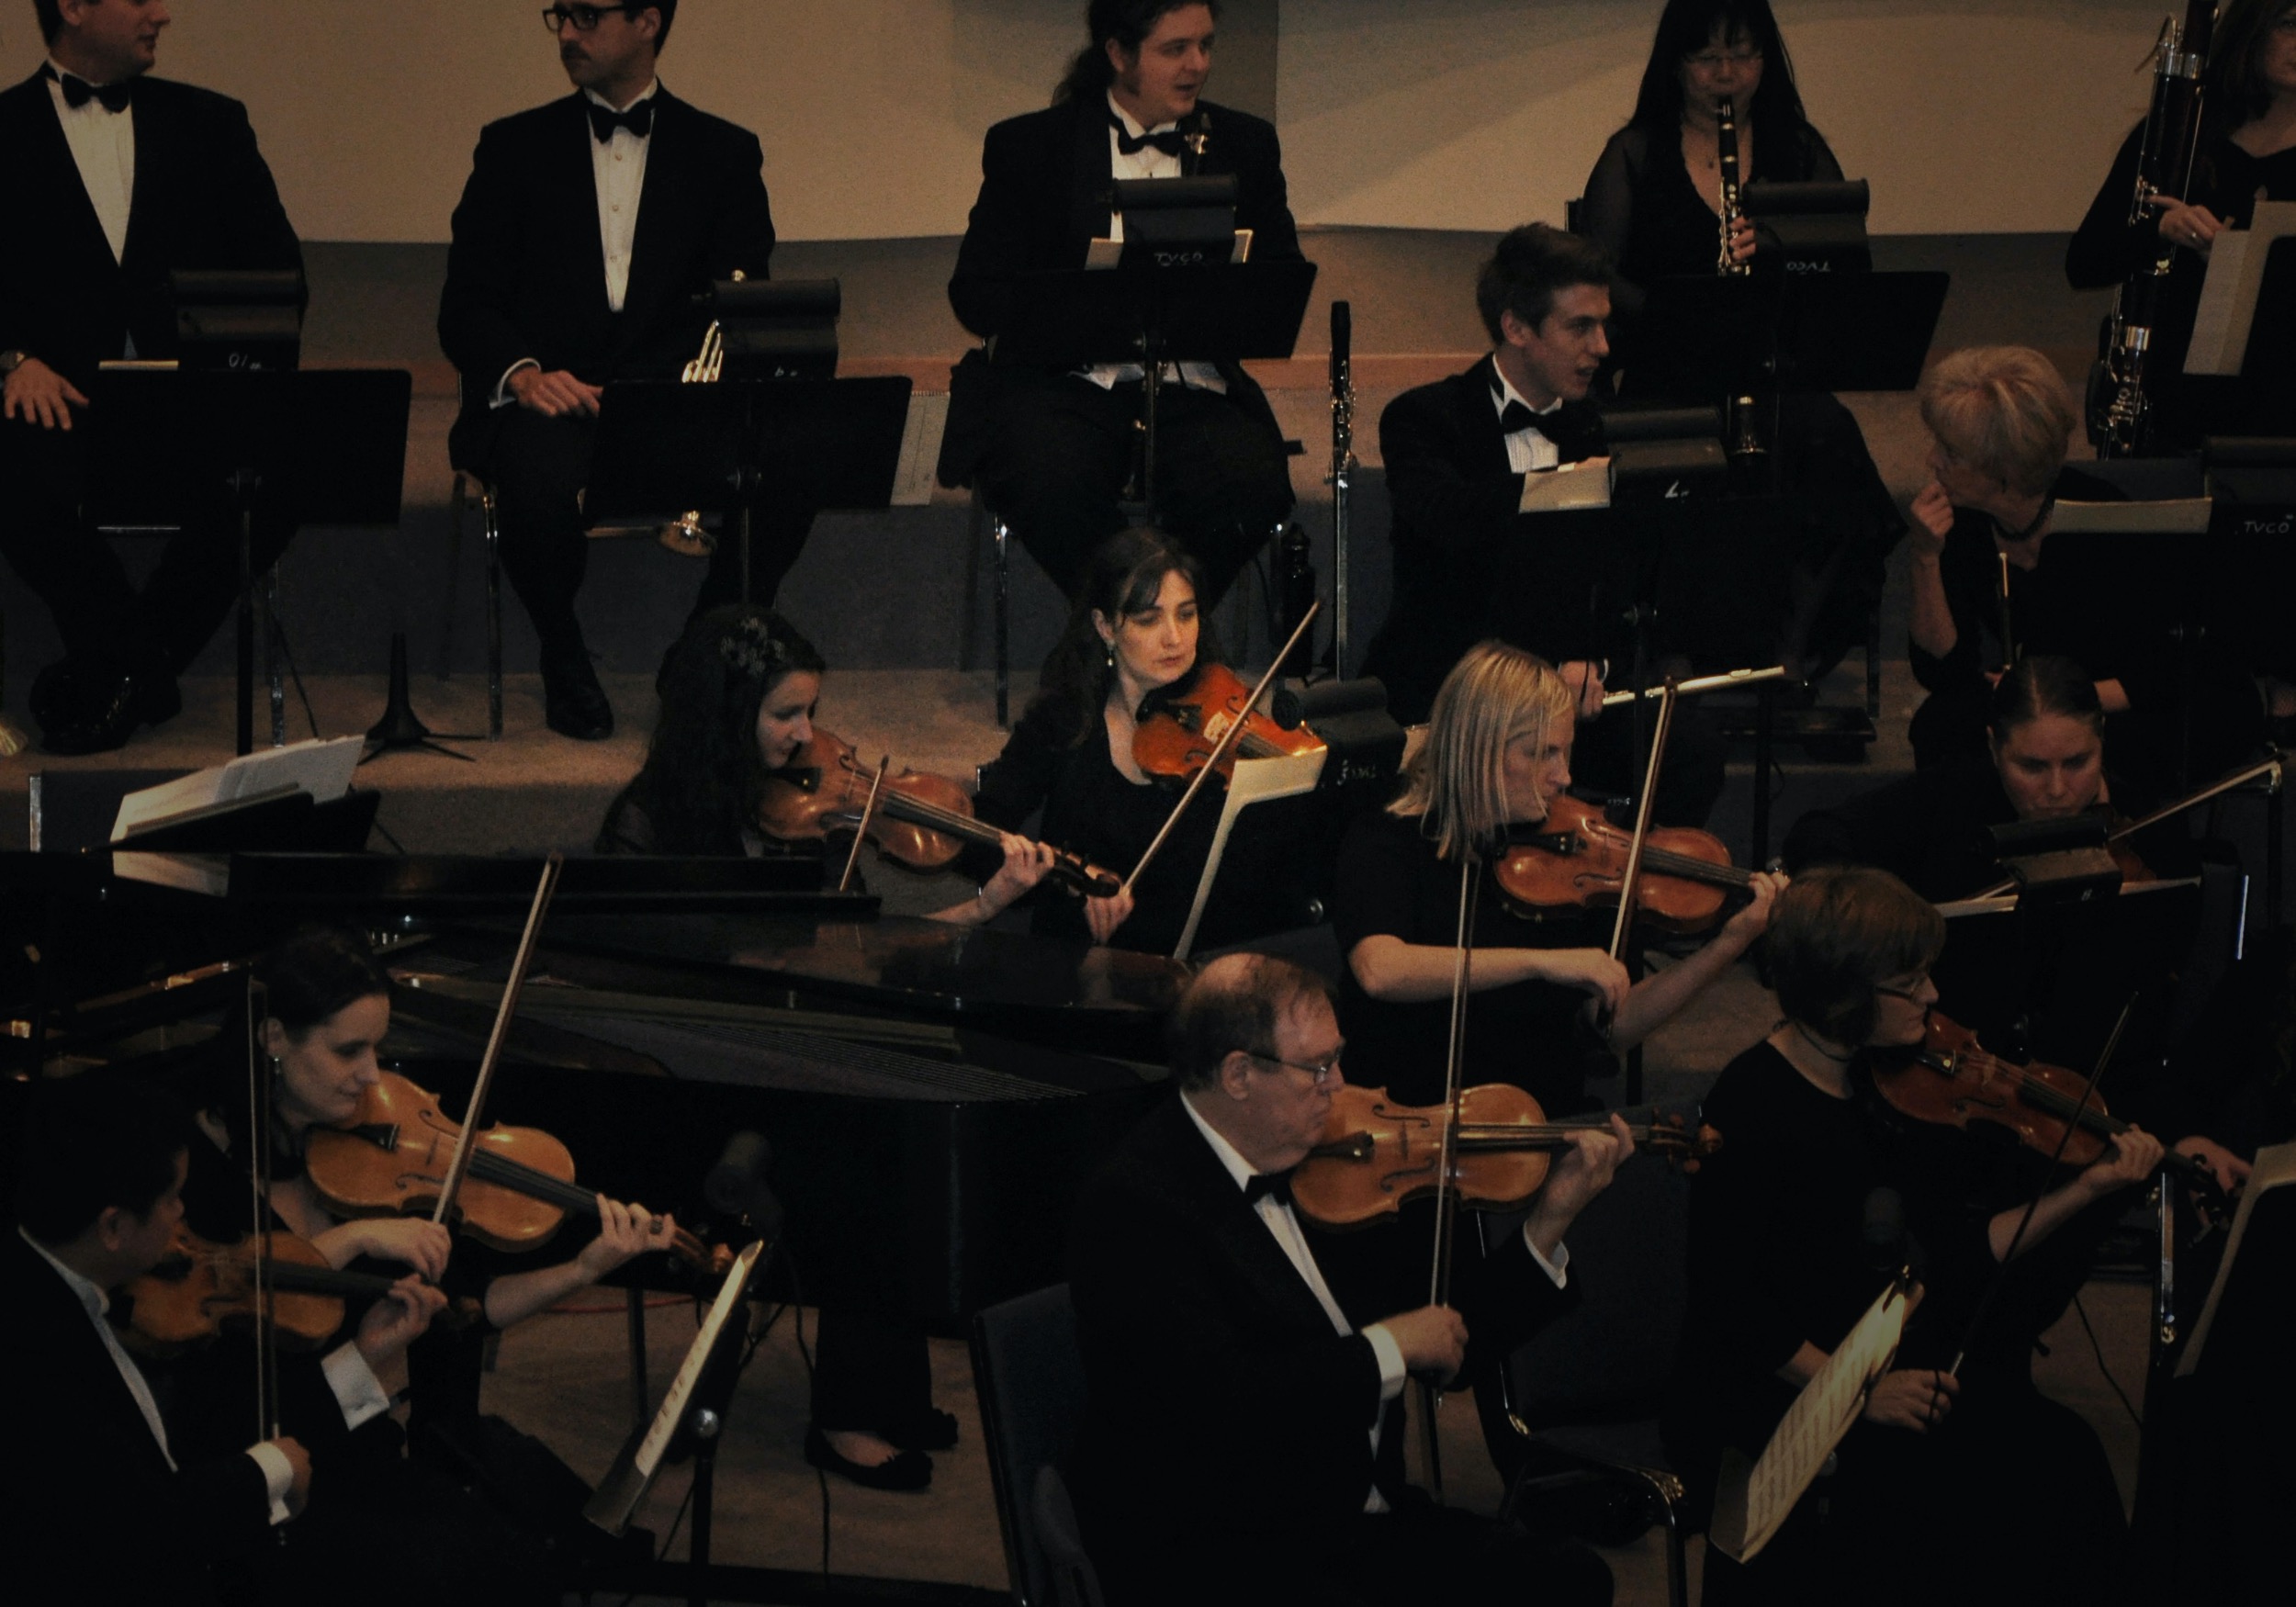 rhiannon in the violin section of a symphony surrounded by other musicians in black formal wear